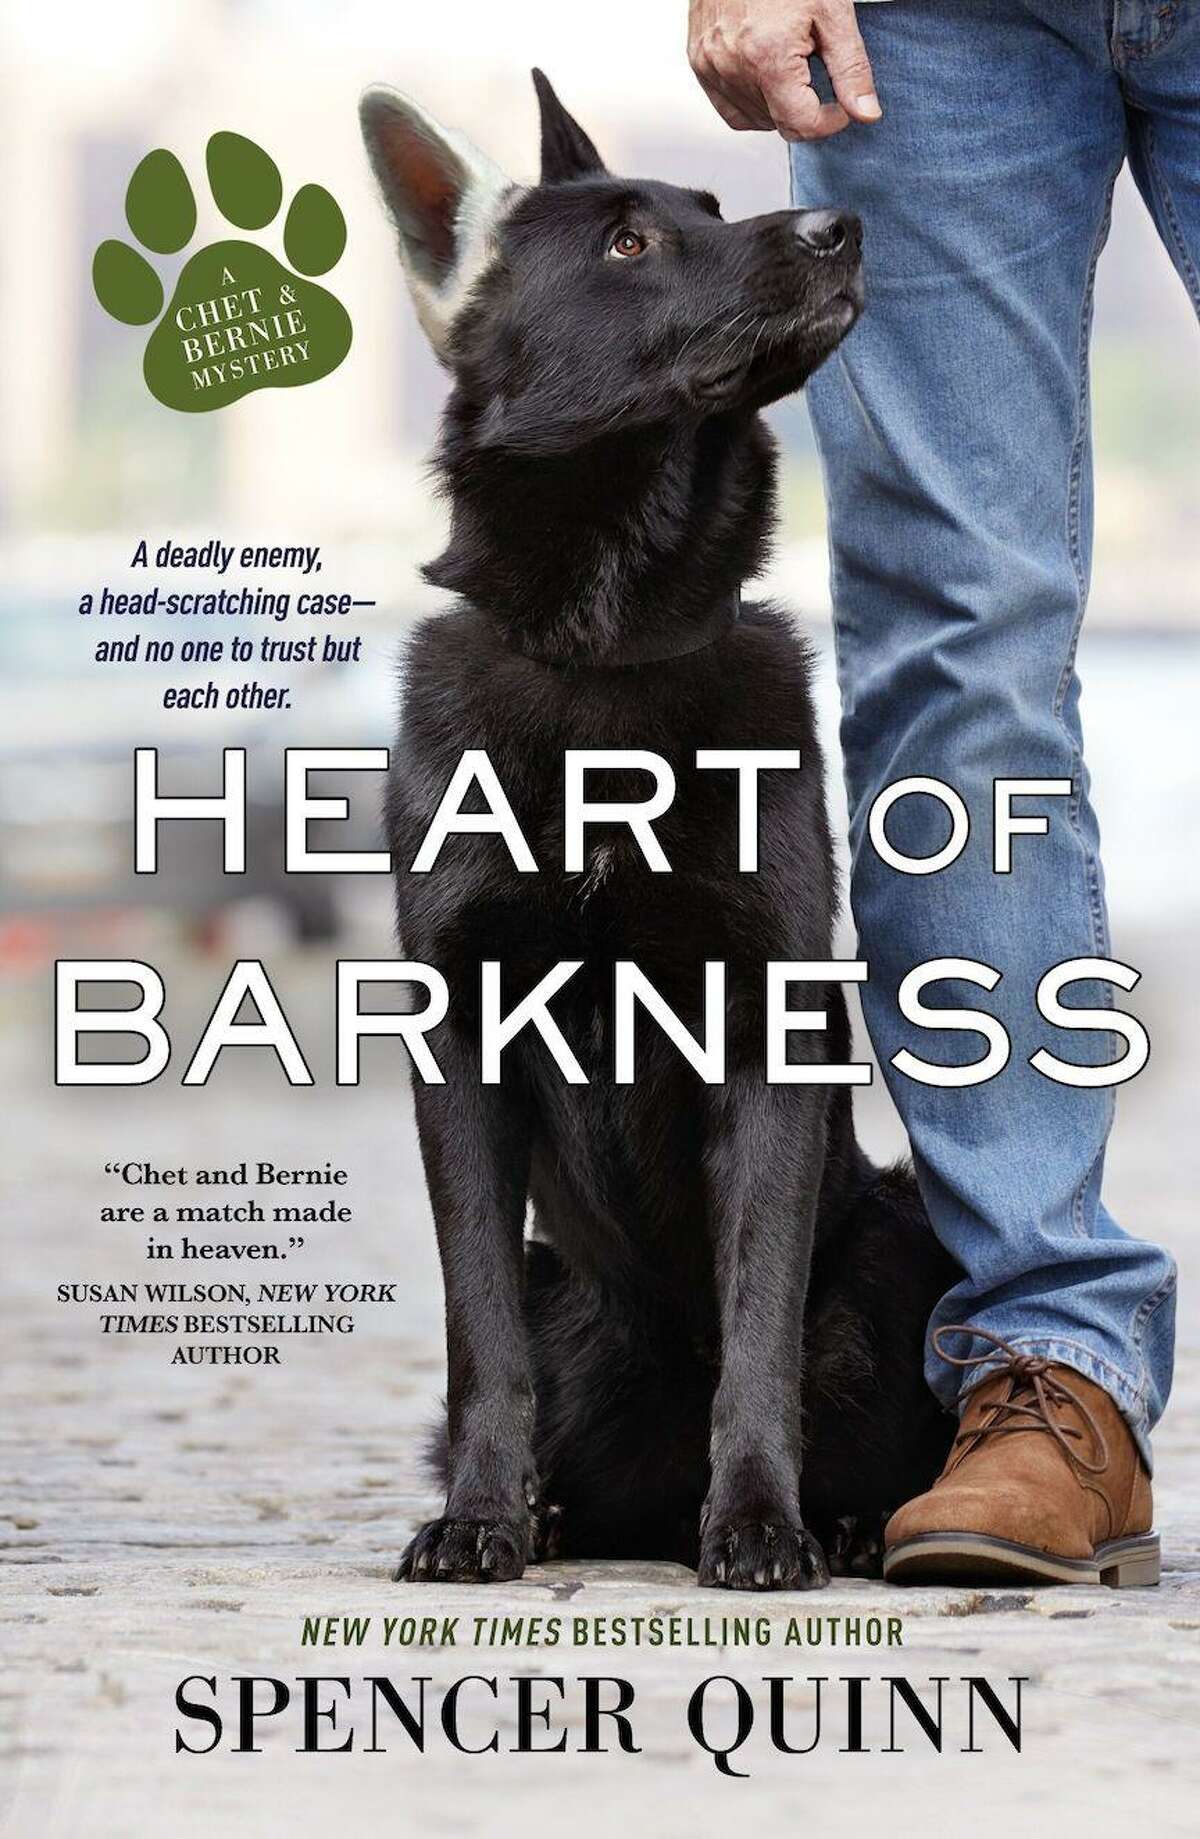 Author Spencer Quinn will be at the Fairfield University Bookstore July 20, during the Fairfield Sidewalk Sale & Street Fair, to meet and greet customers and sign copies of his latest book, “Heart of Barkness — a Chet and Bernie Mystery.”